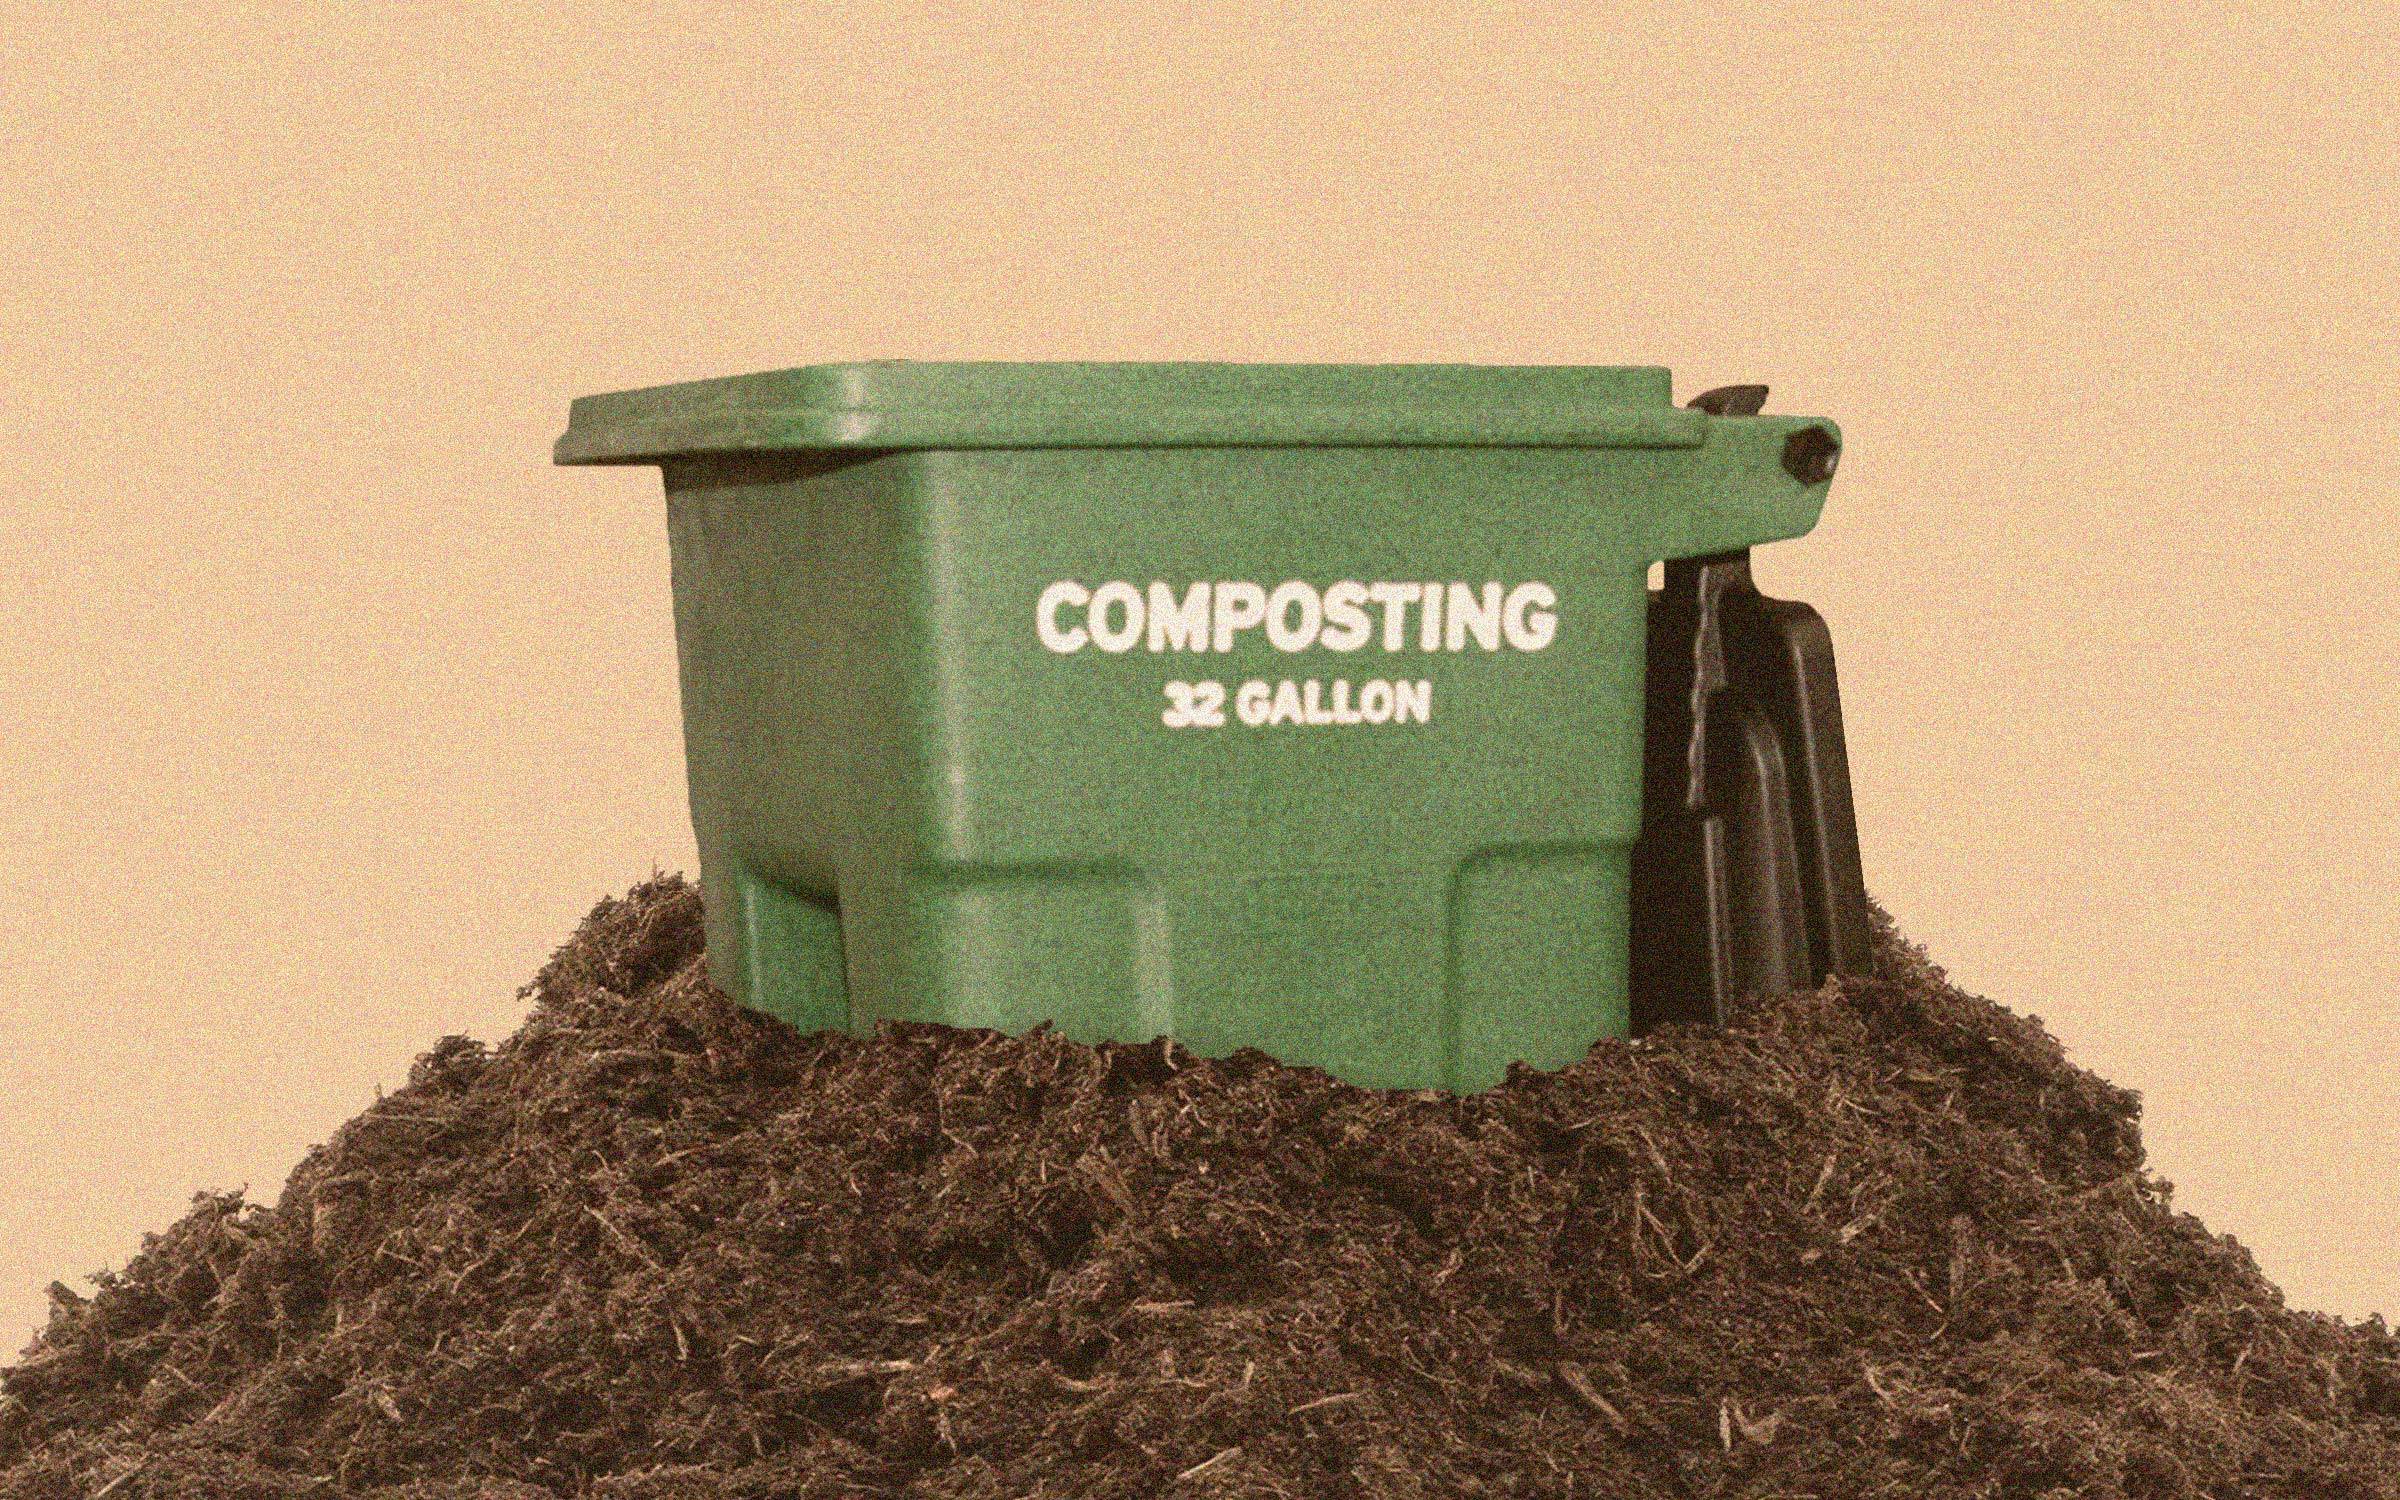 https://img.texasmonthly.com/2022/04/composting-in-texas.jpg?auto=compress&crop=faces&fit=fit&fm=pjpg&ixlib=php-3.3.1&q=45